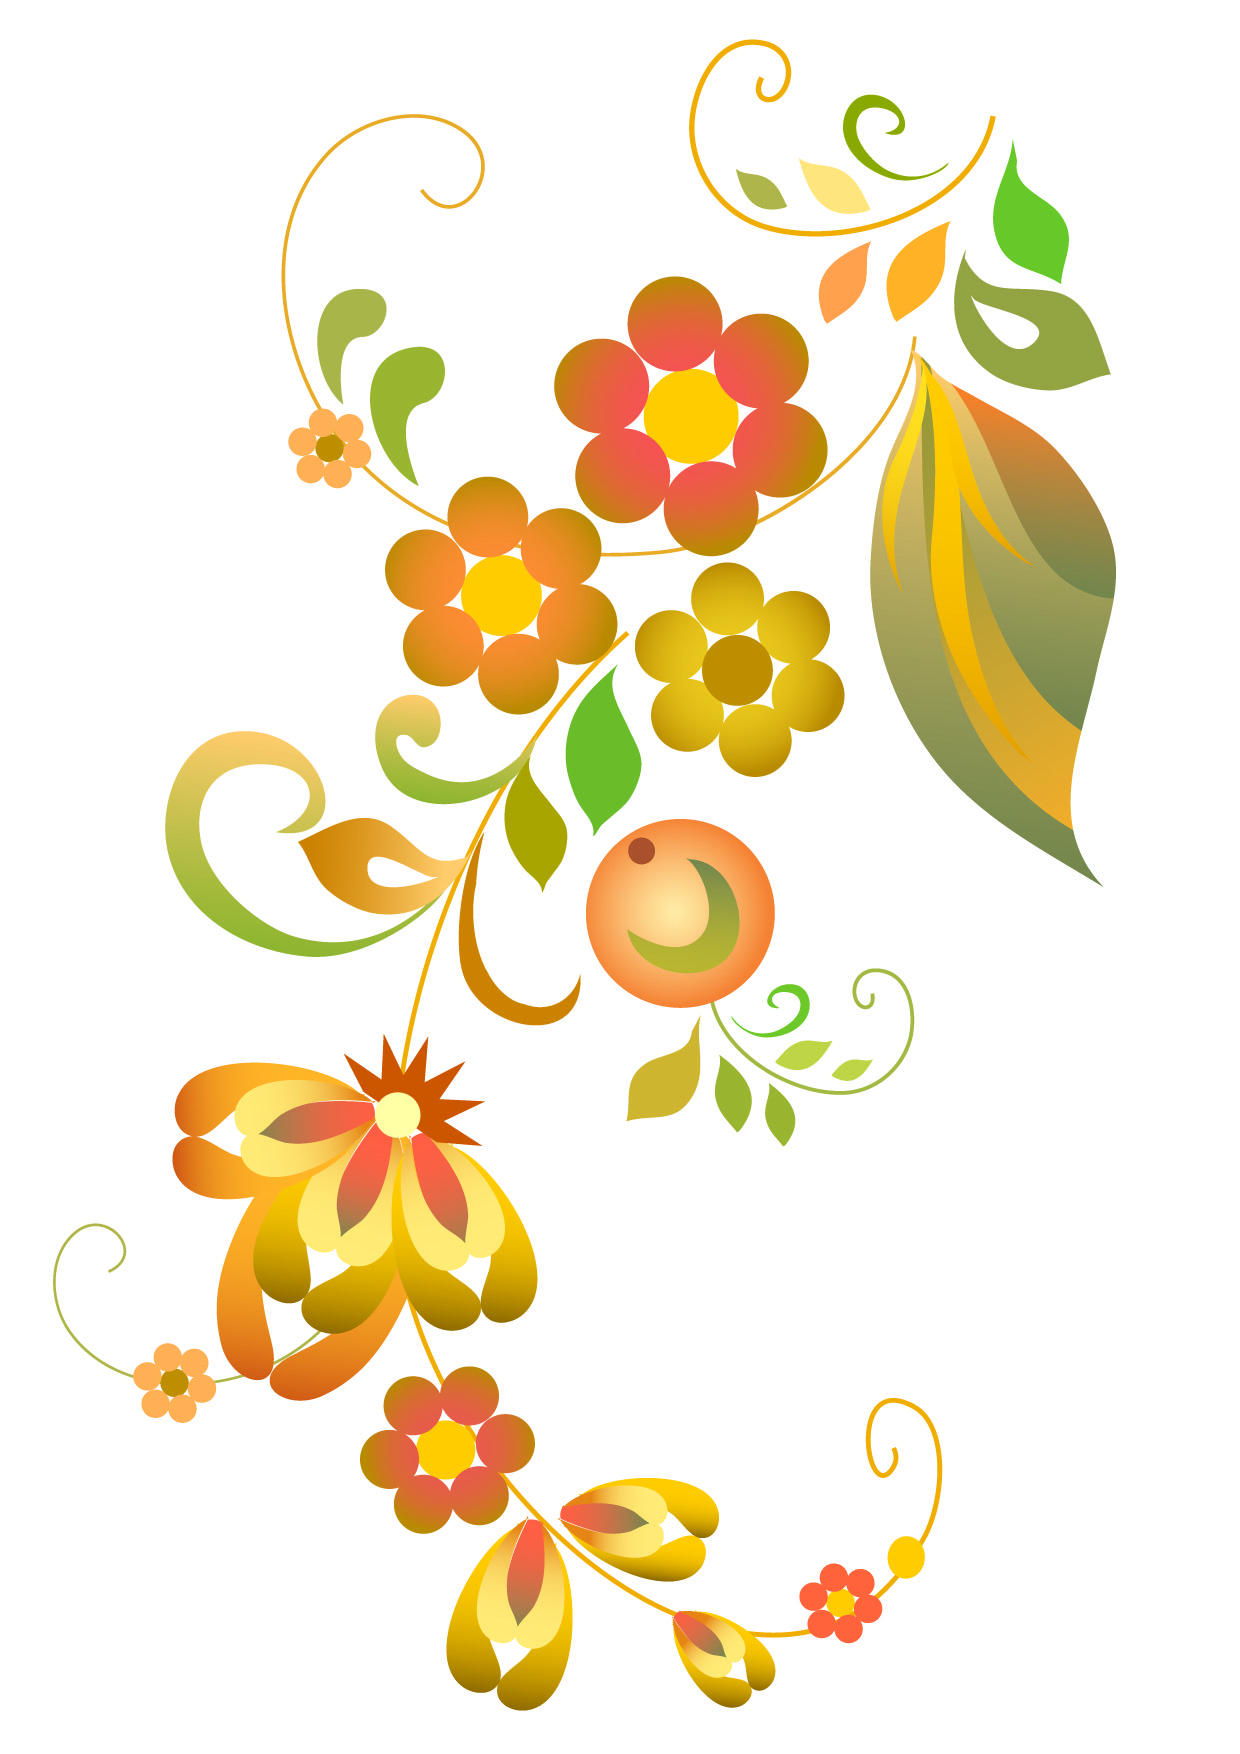 free vector clipart flowers - photo #19